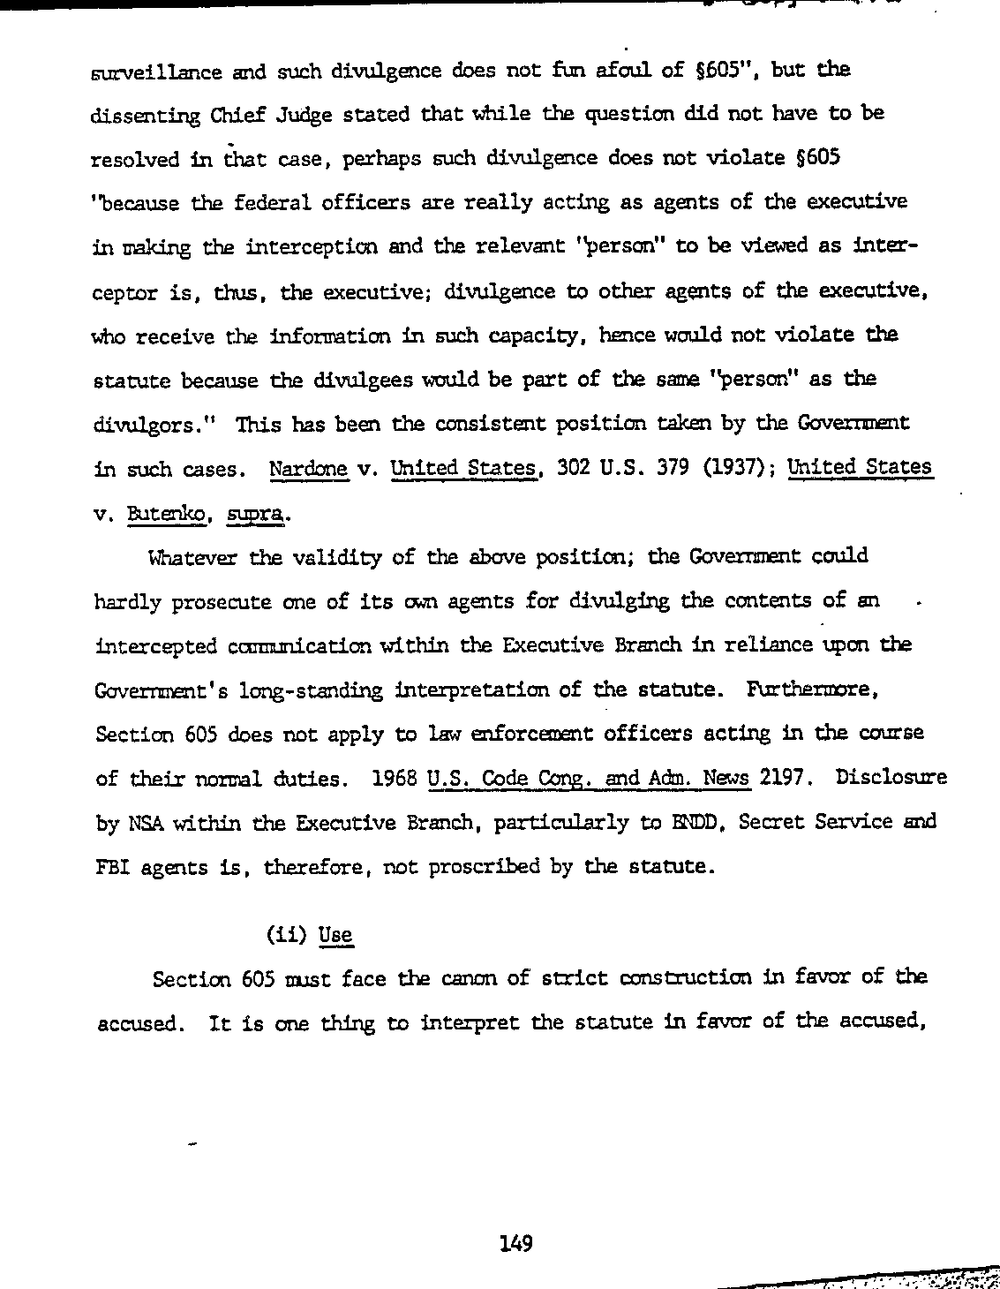 Page 157 from Report on Inquiry Into CIA Related Electronic Surveillance Activities